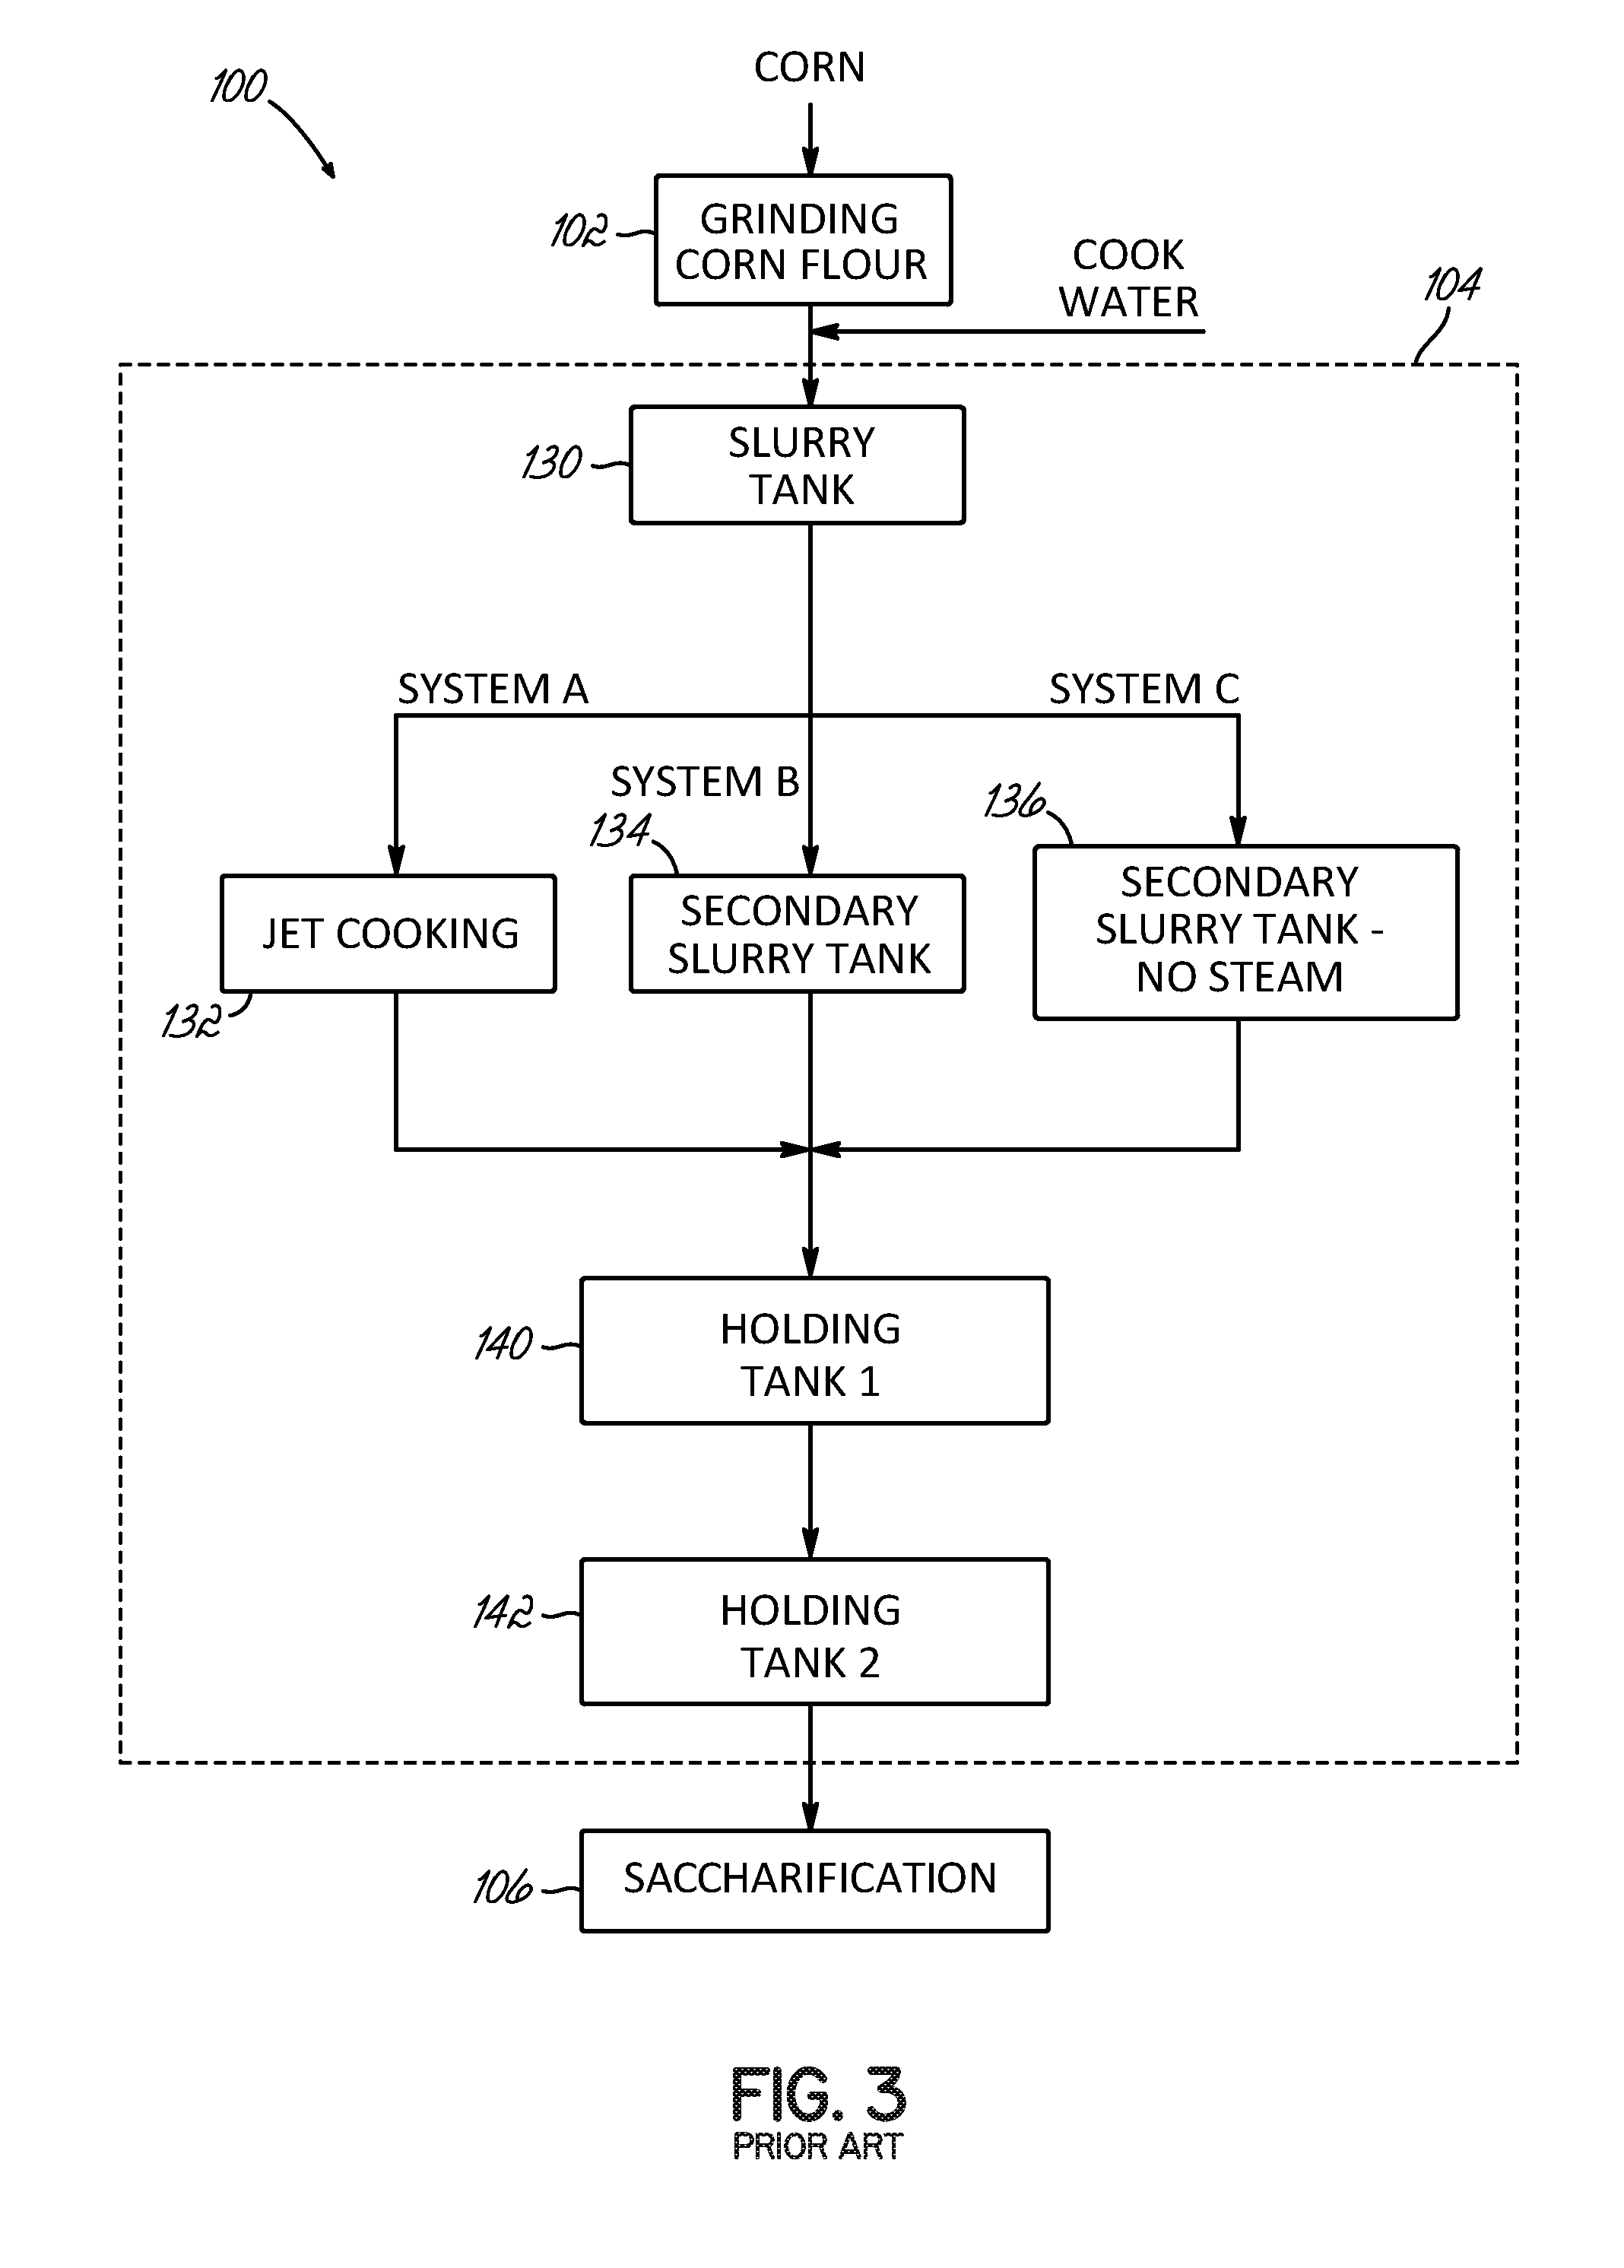 Systems and methods for producing a sugar stream